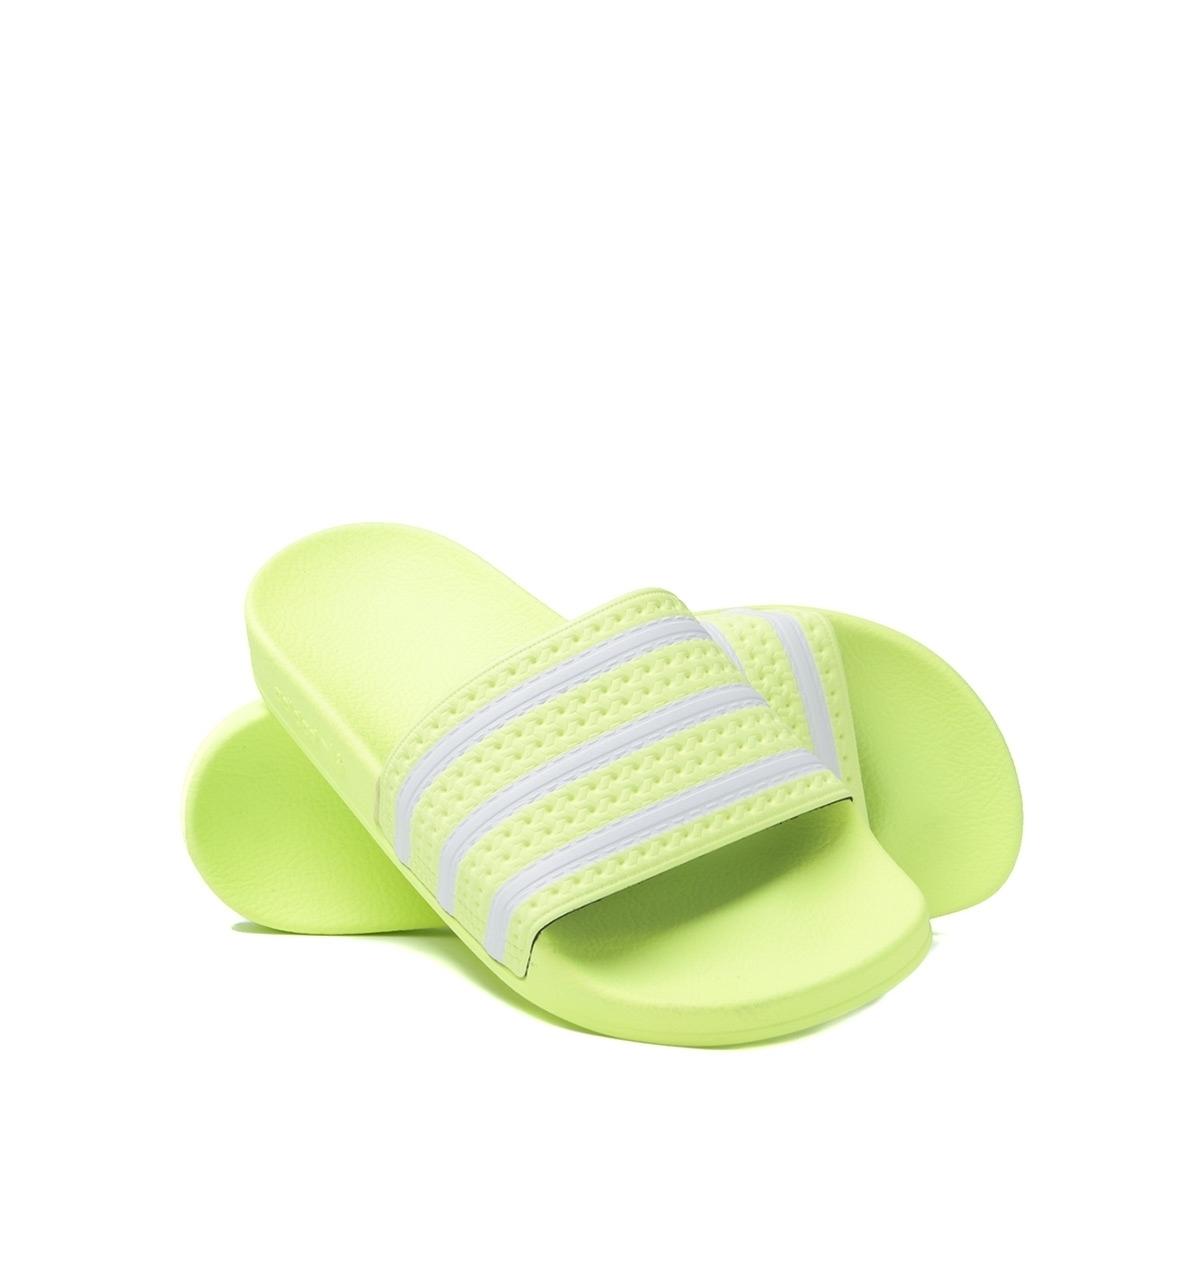 Foreigner Holiday File adidas Originals Adilette Neon Yellow Slides for Men | Lyst